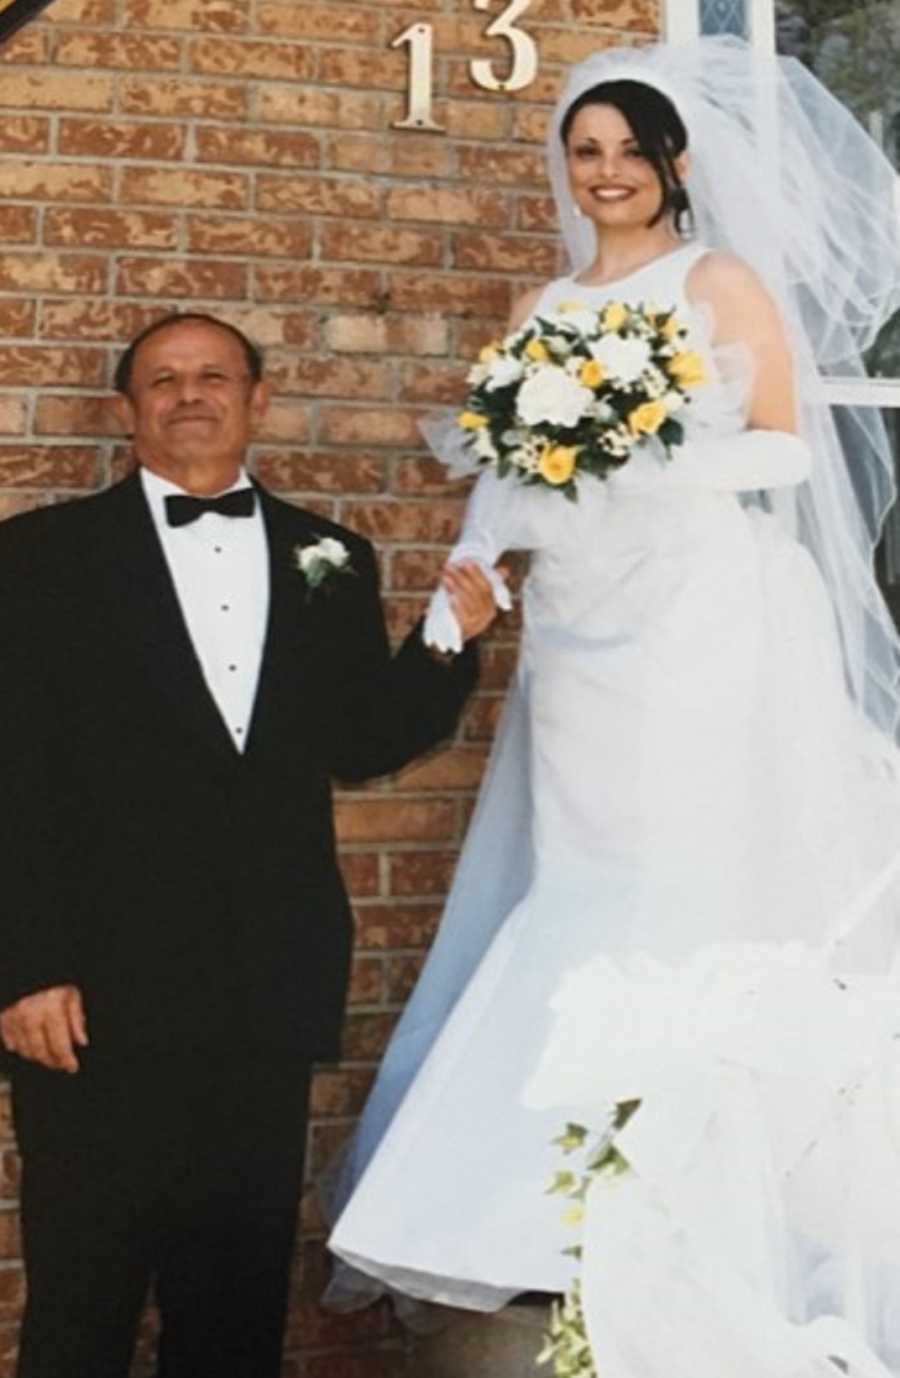 Woman on her wedding day holding hands with father who has since passed away